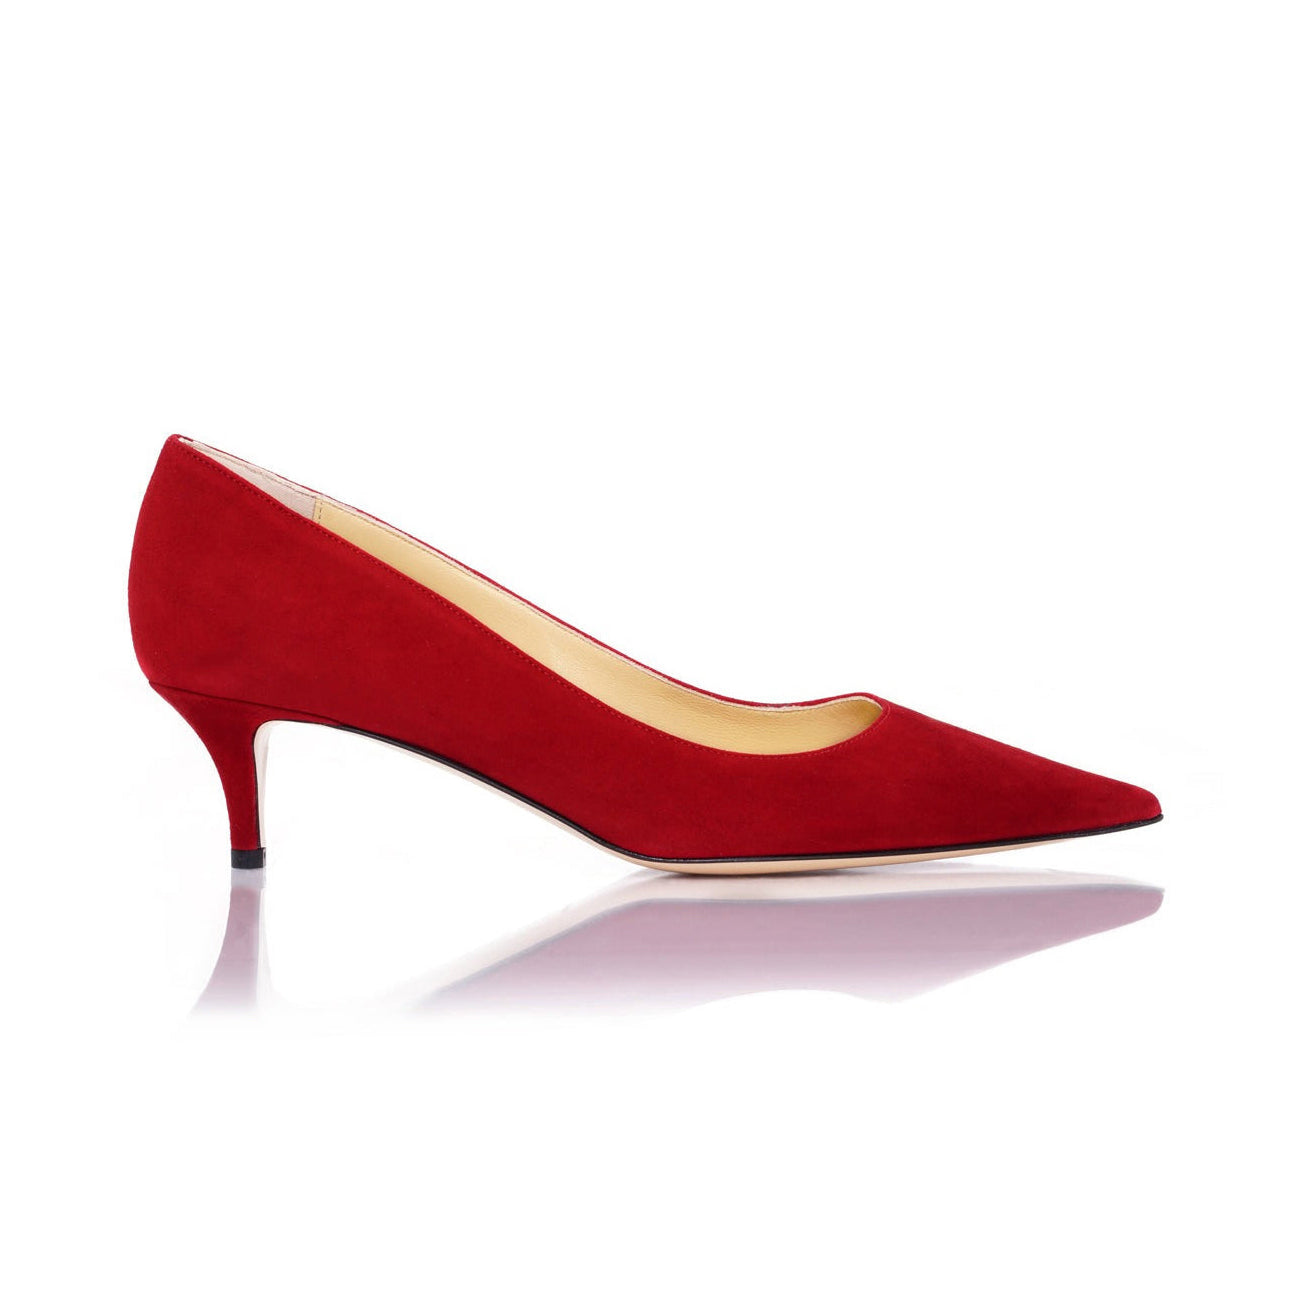 Classic 45 Pointed Toe Pump in Red Suede